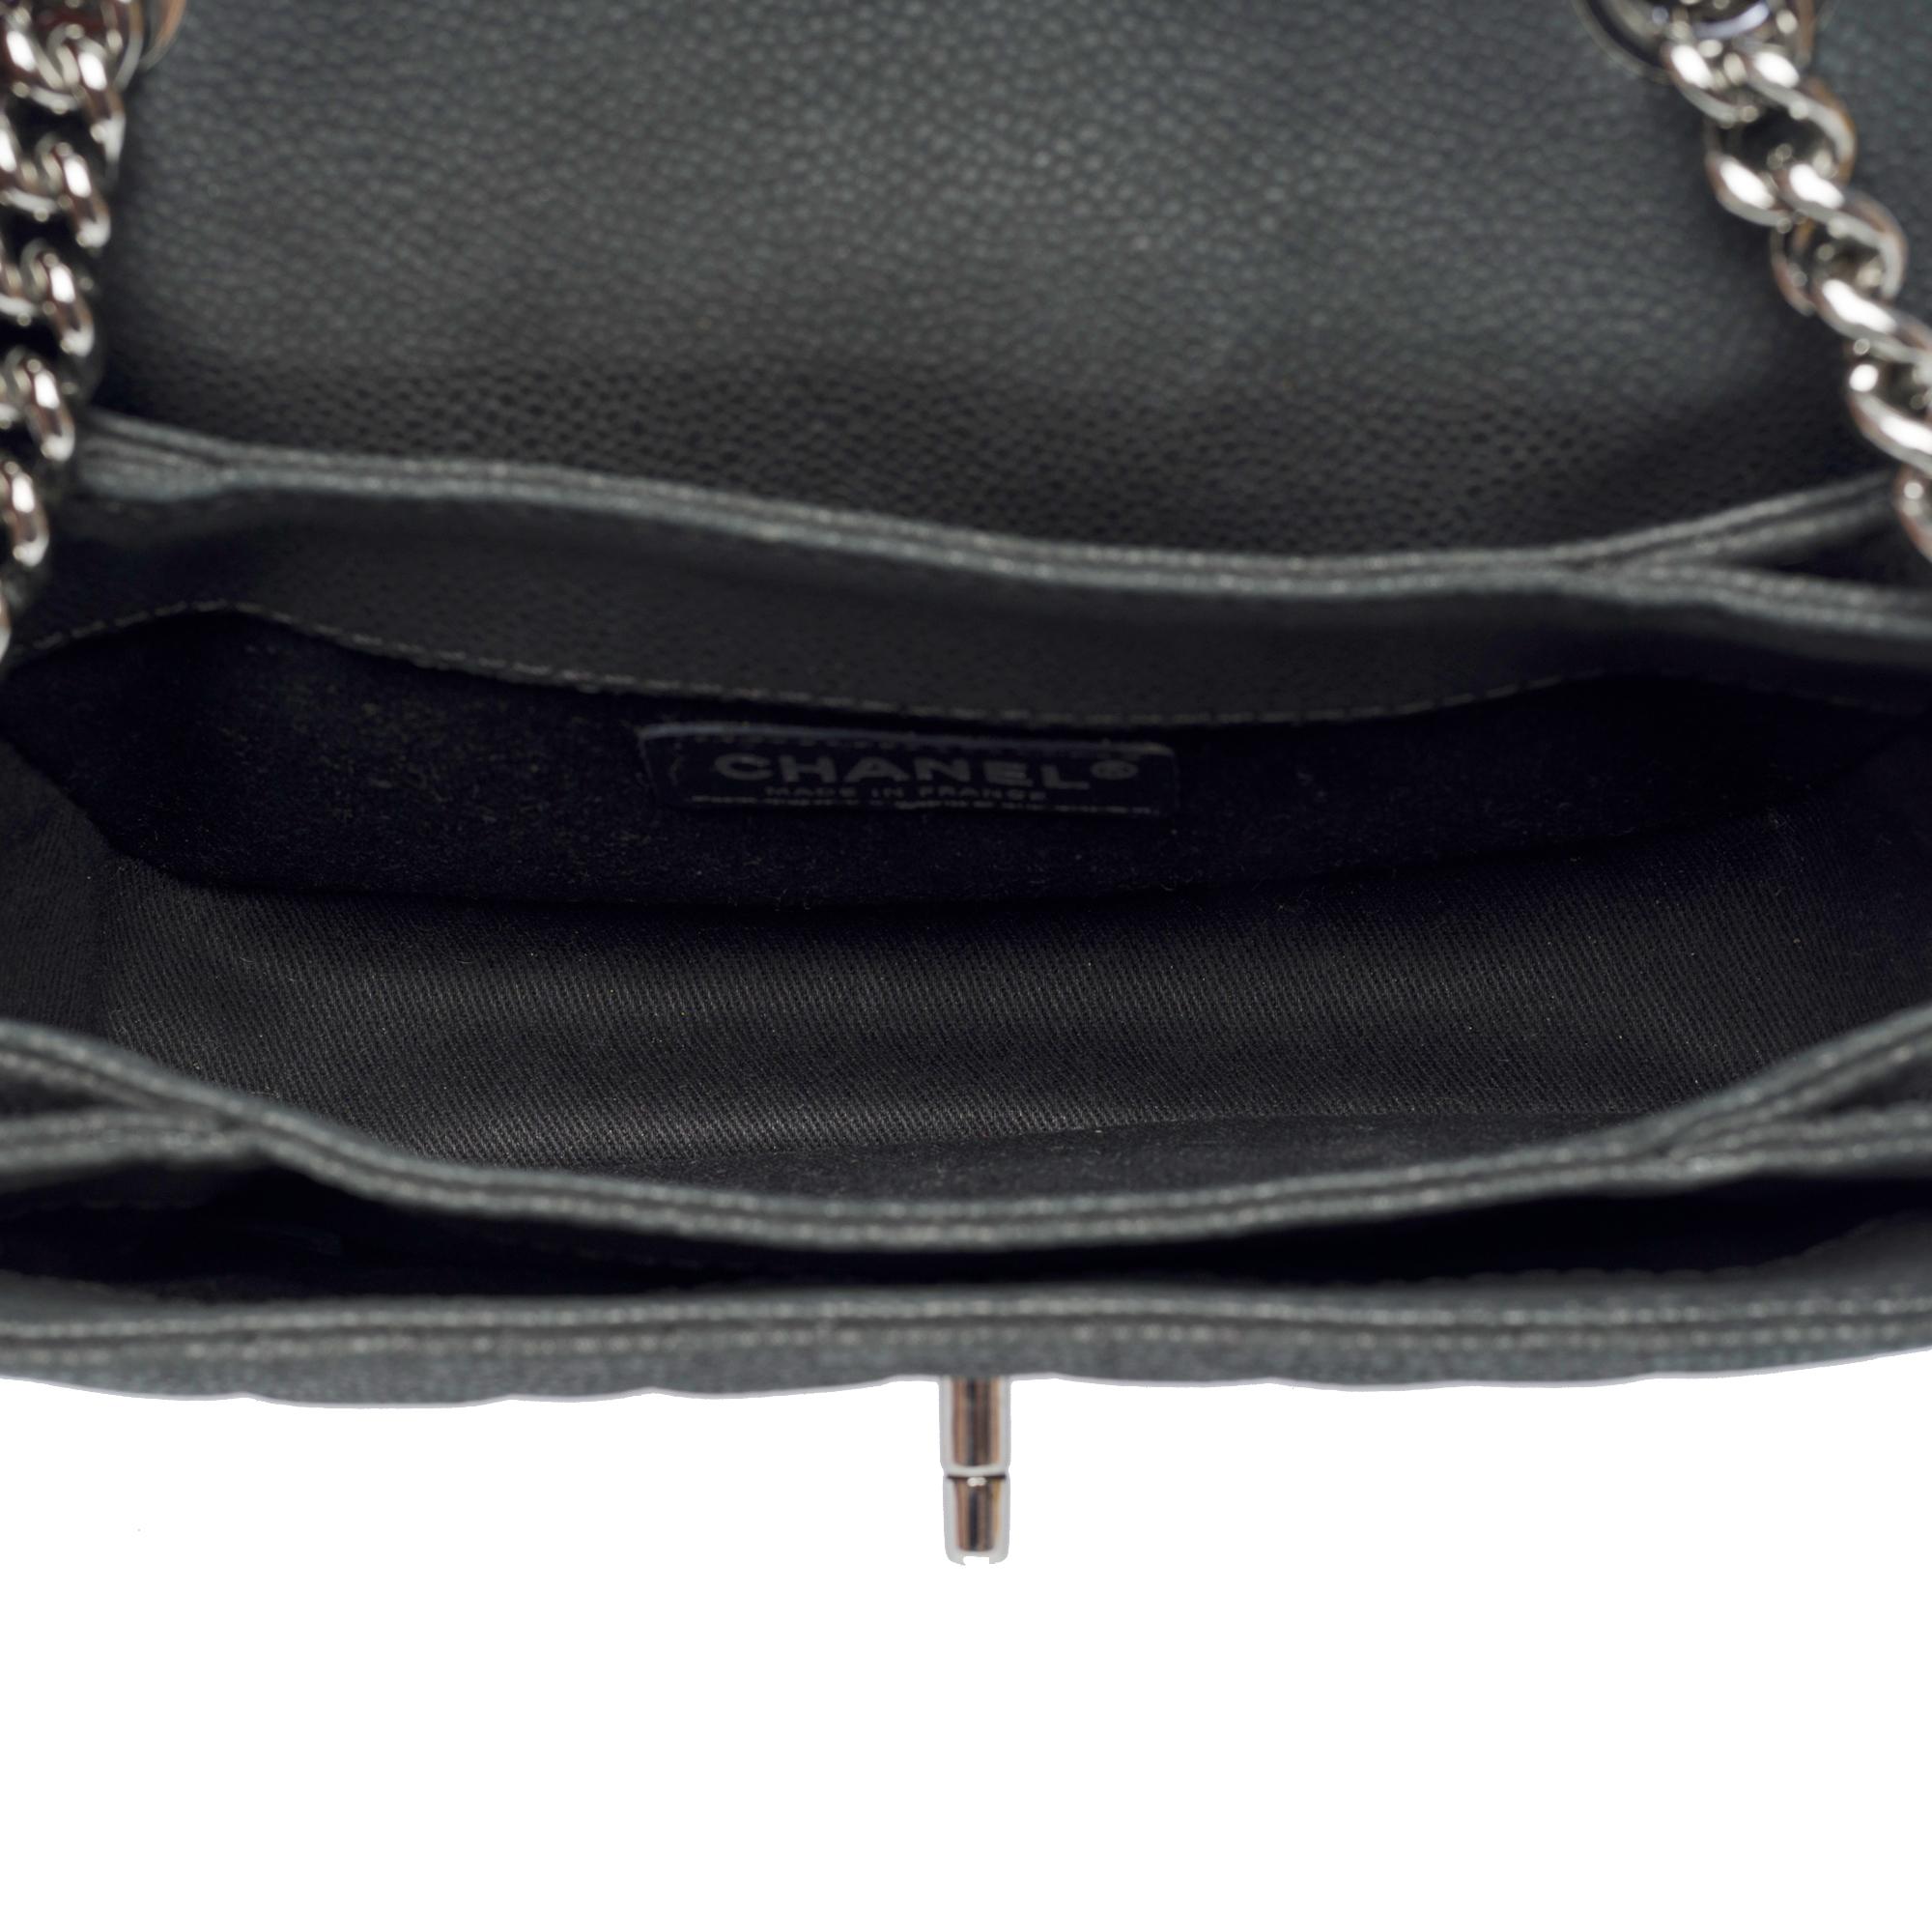 Amazing Chanel Timeless Mini flap shoulder bag in Black Caviar leather, SHW For Sale 4